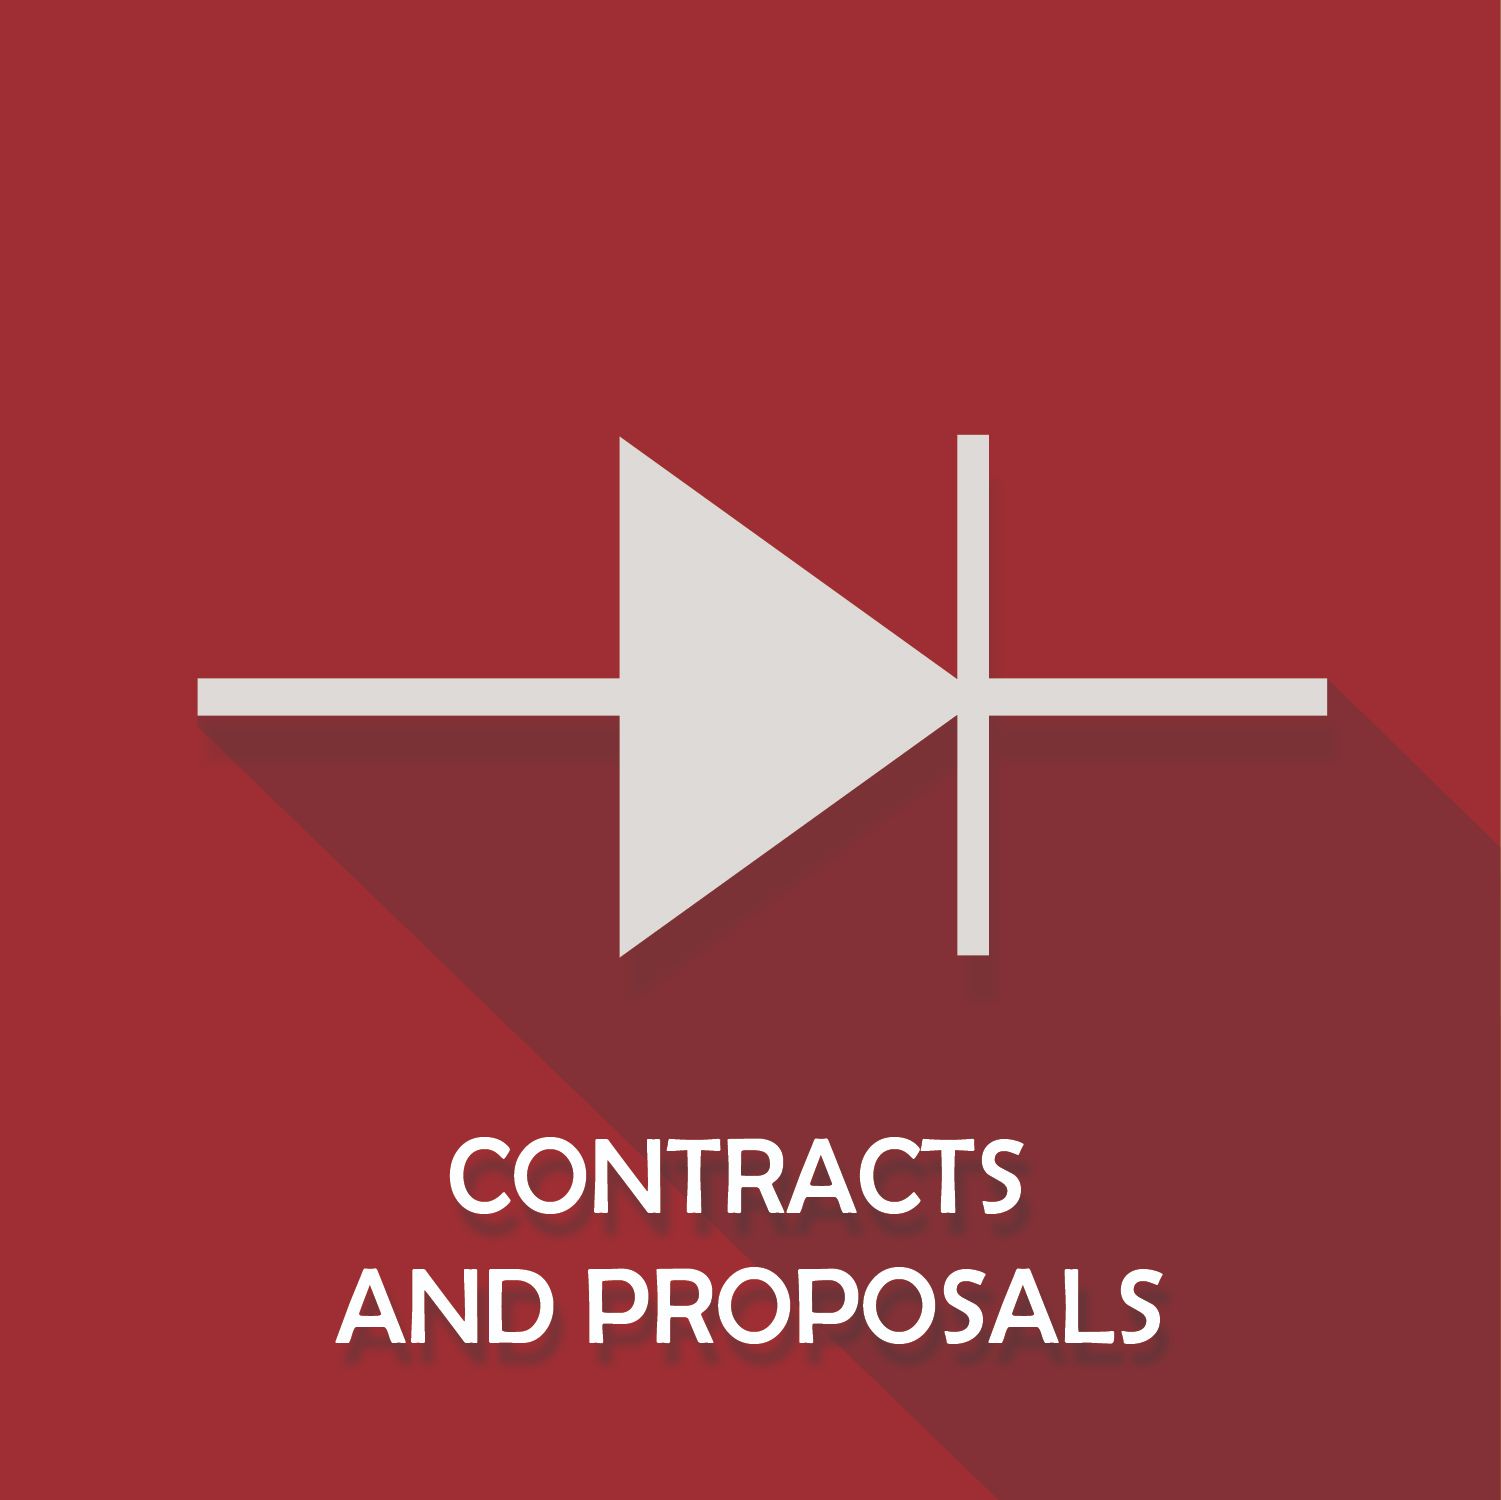 Contracts and Proposals
